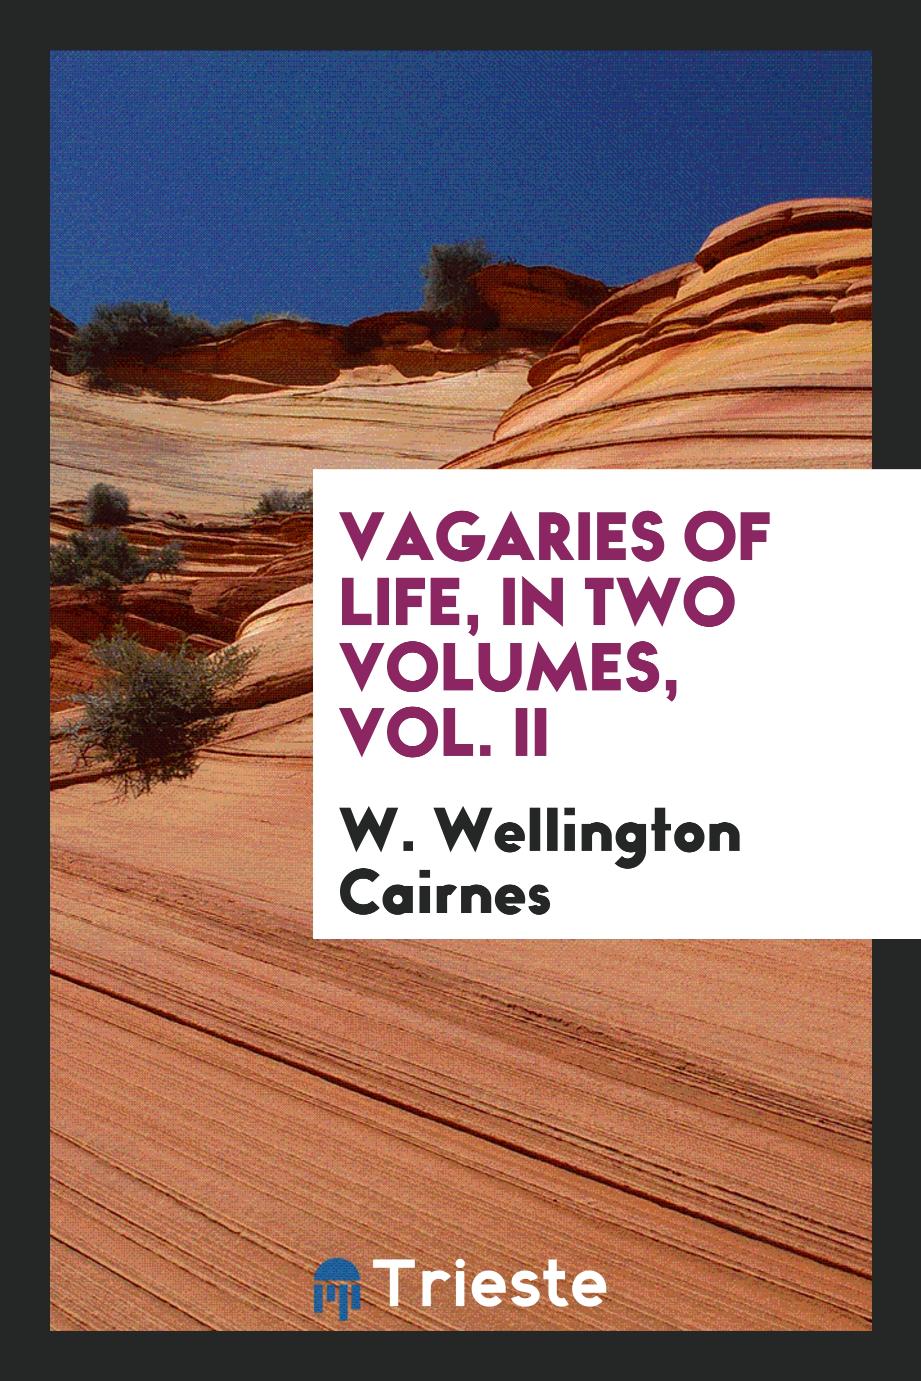 Vagaries of life, in two volumes, Vol. II